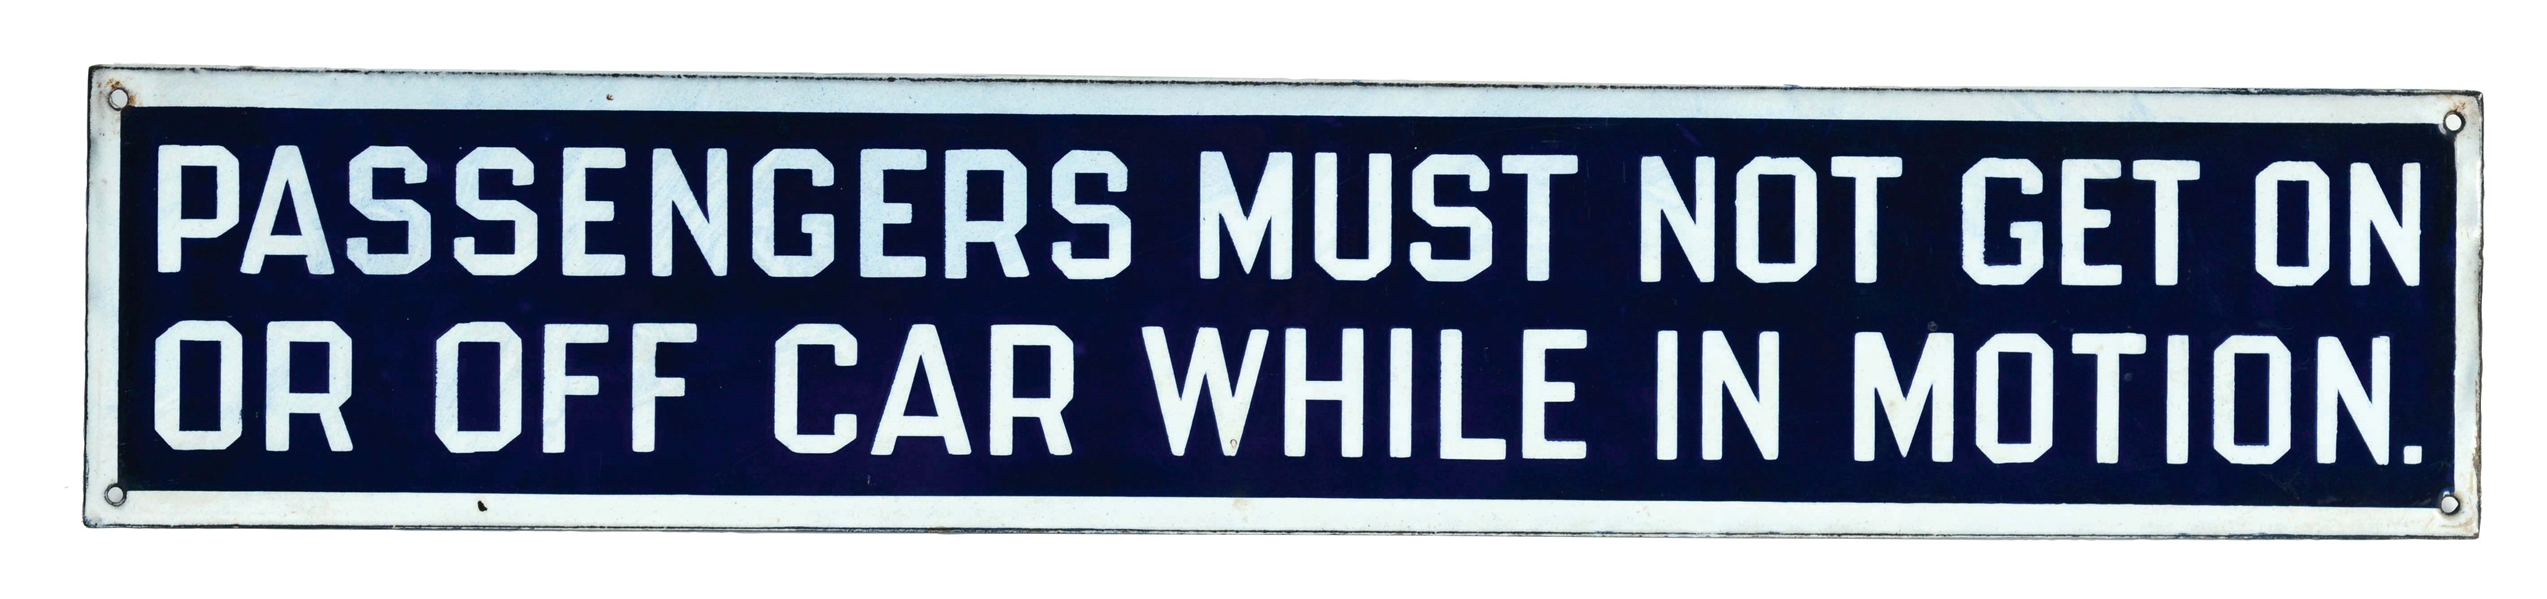 PASSENGERS MUST NOT GET ON OR OFF CAR WHILE IN MOTION PORCELAIN TROLLEY SIGN.